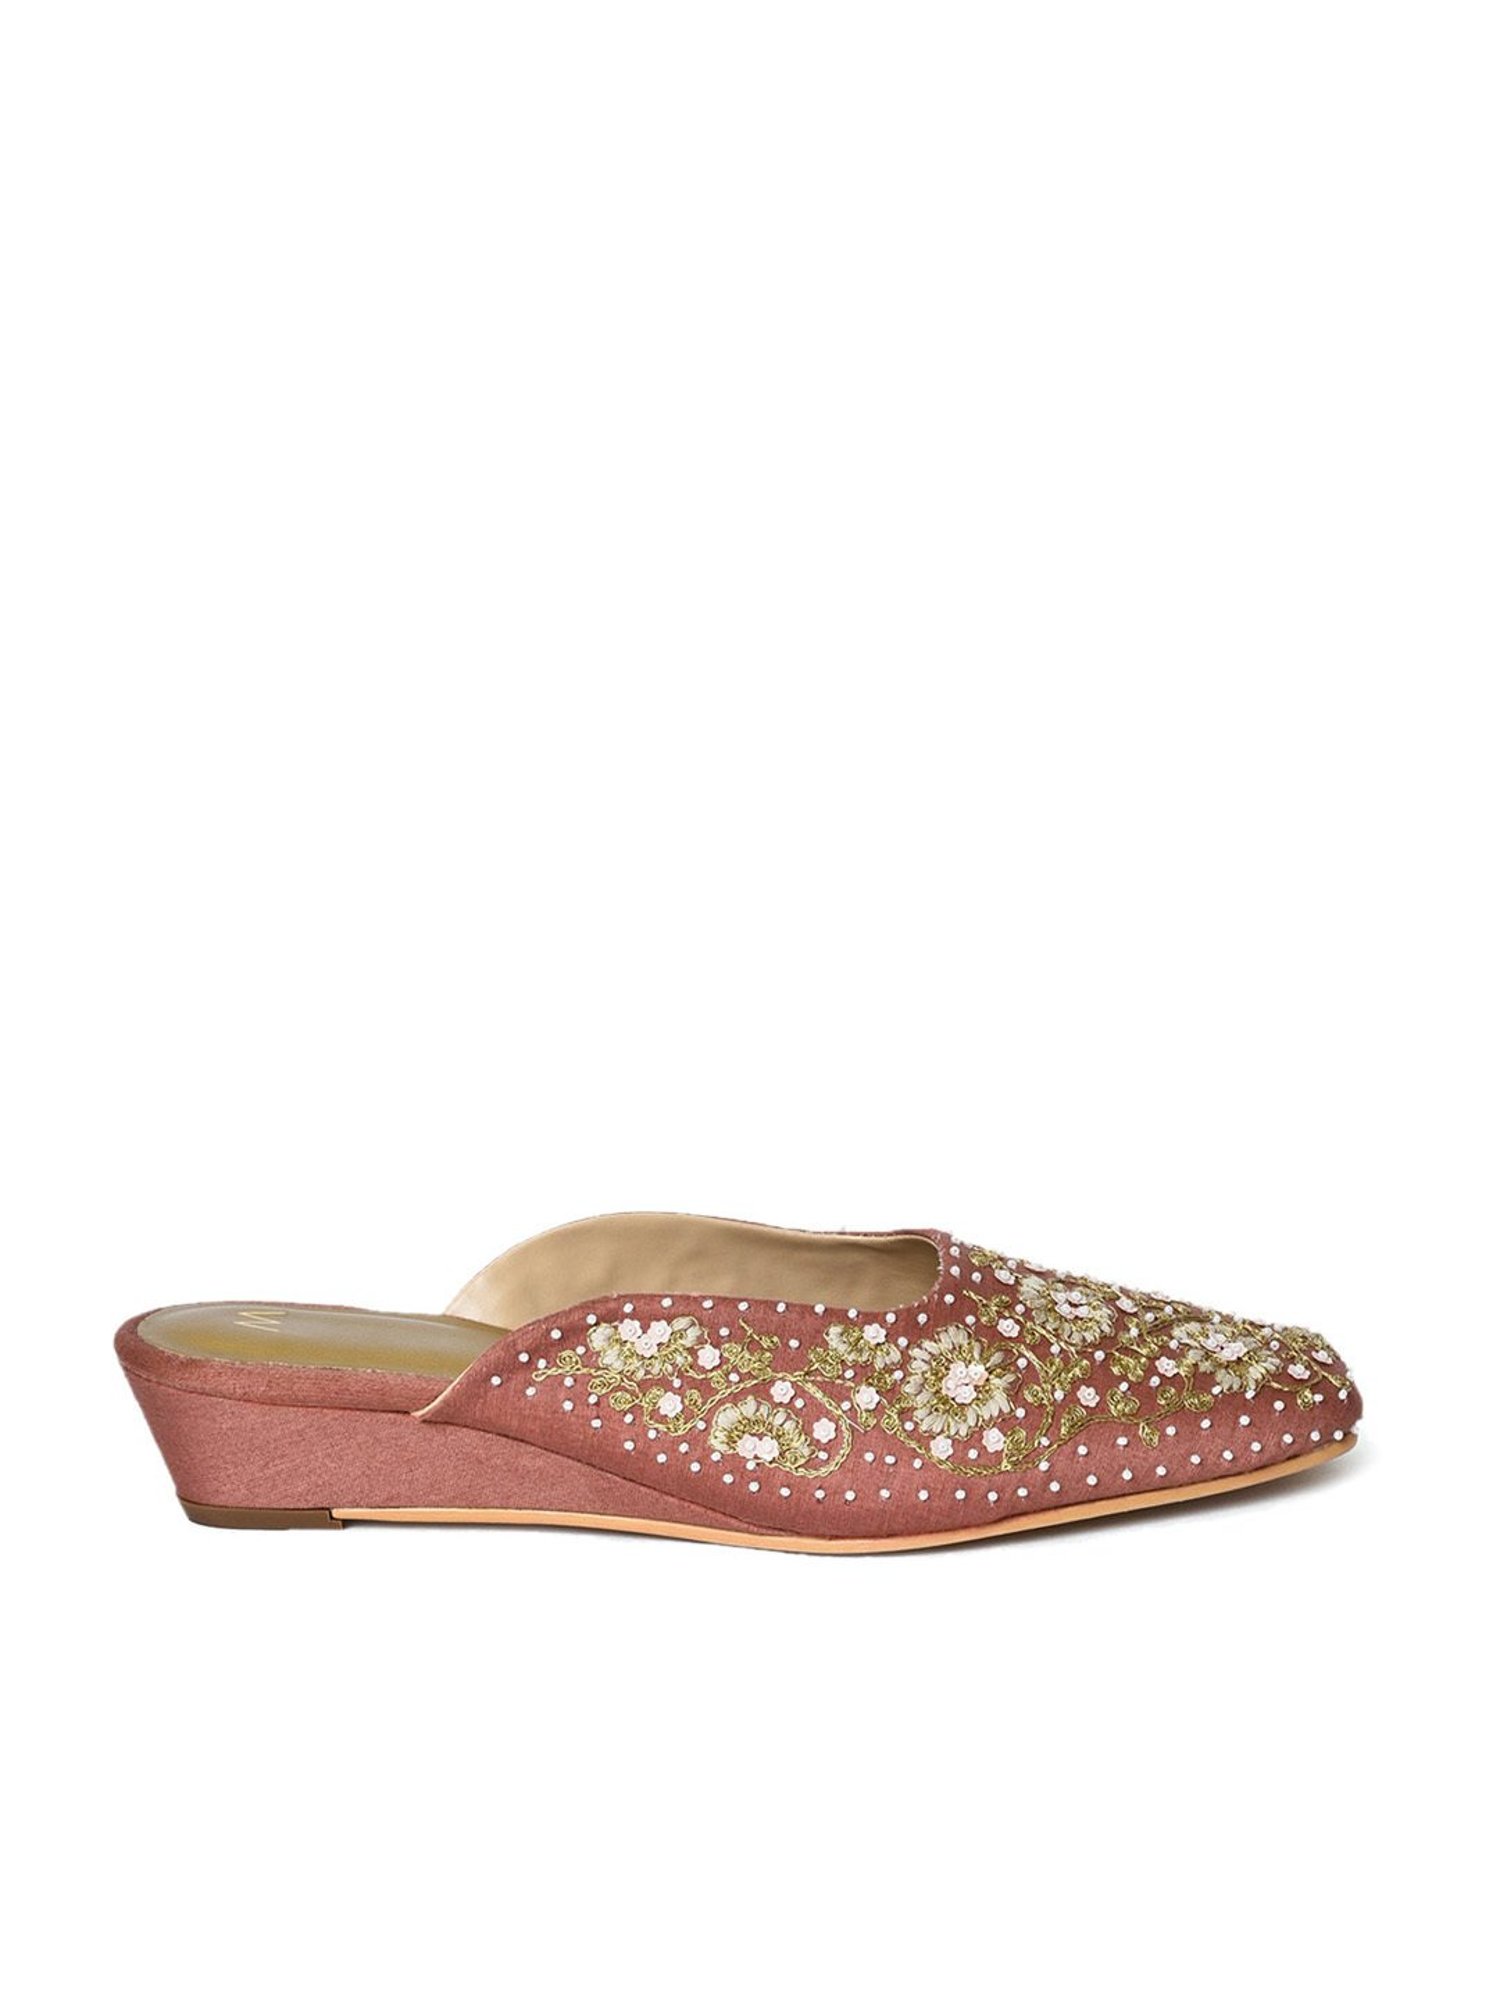 Gajra Gang Chand sitara Multi Color Beaded Lace and Embroidery Sandal –  Nykaa Fashion